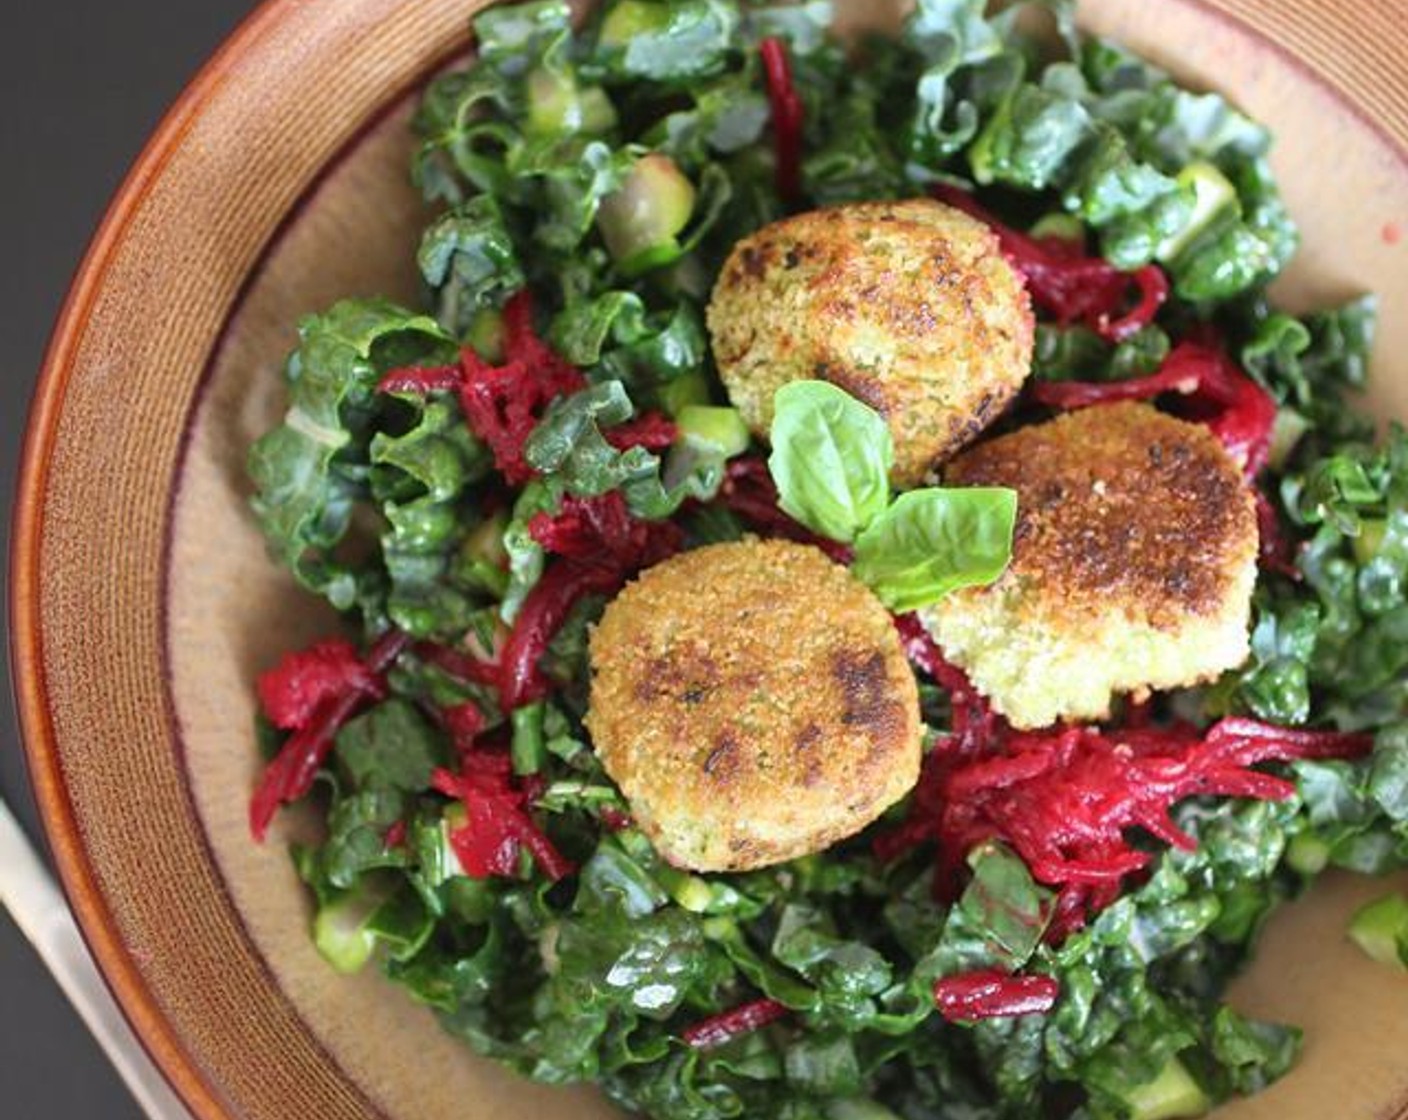 Fried Cashew Cheese Kale Salad with Pickled Beets